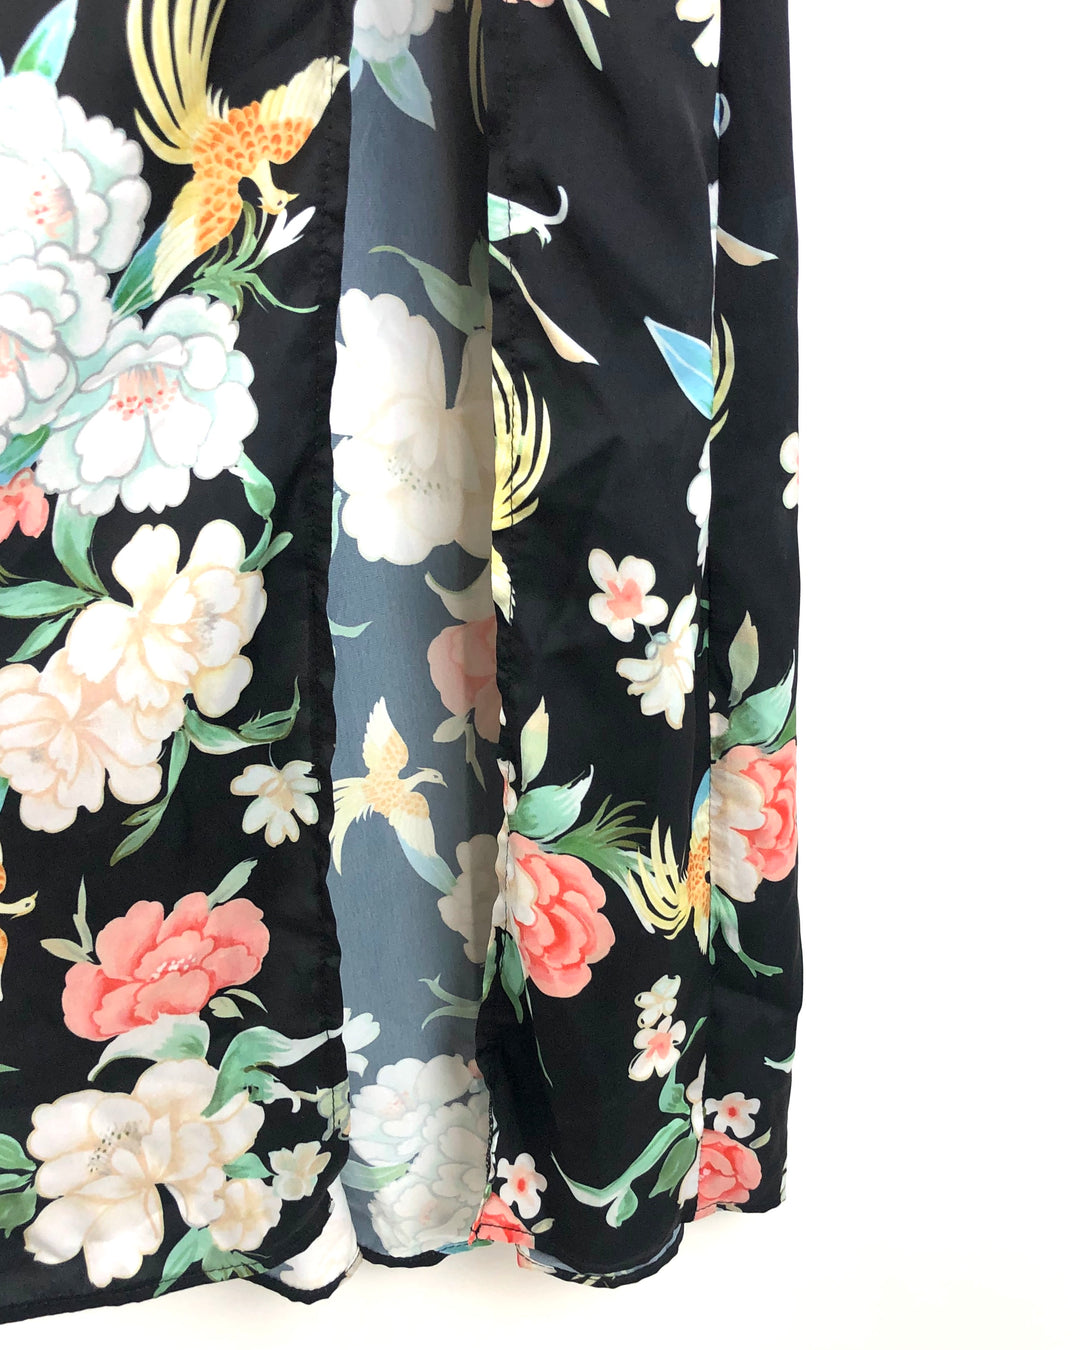 Black Floral Skirt - Extra Small